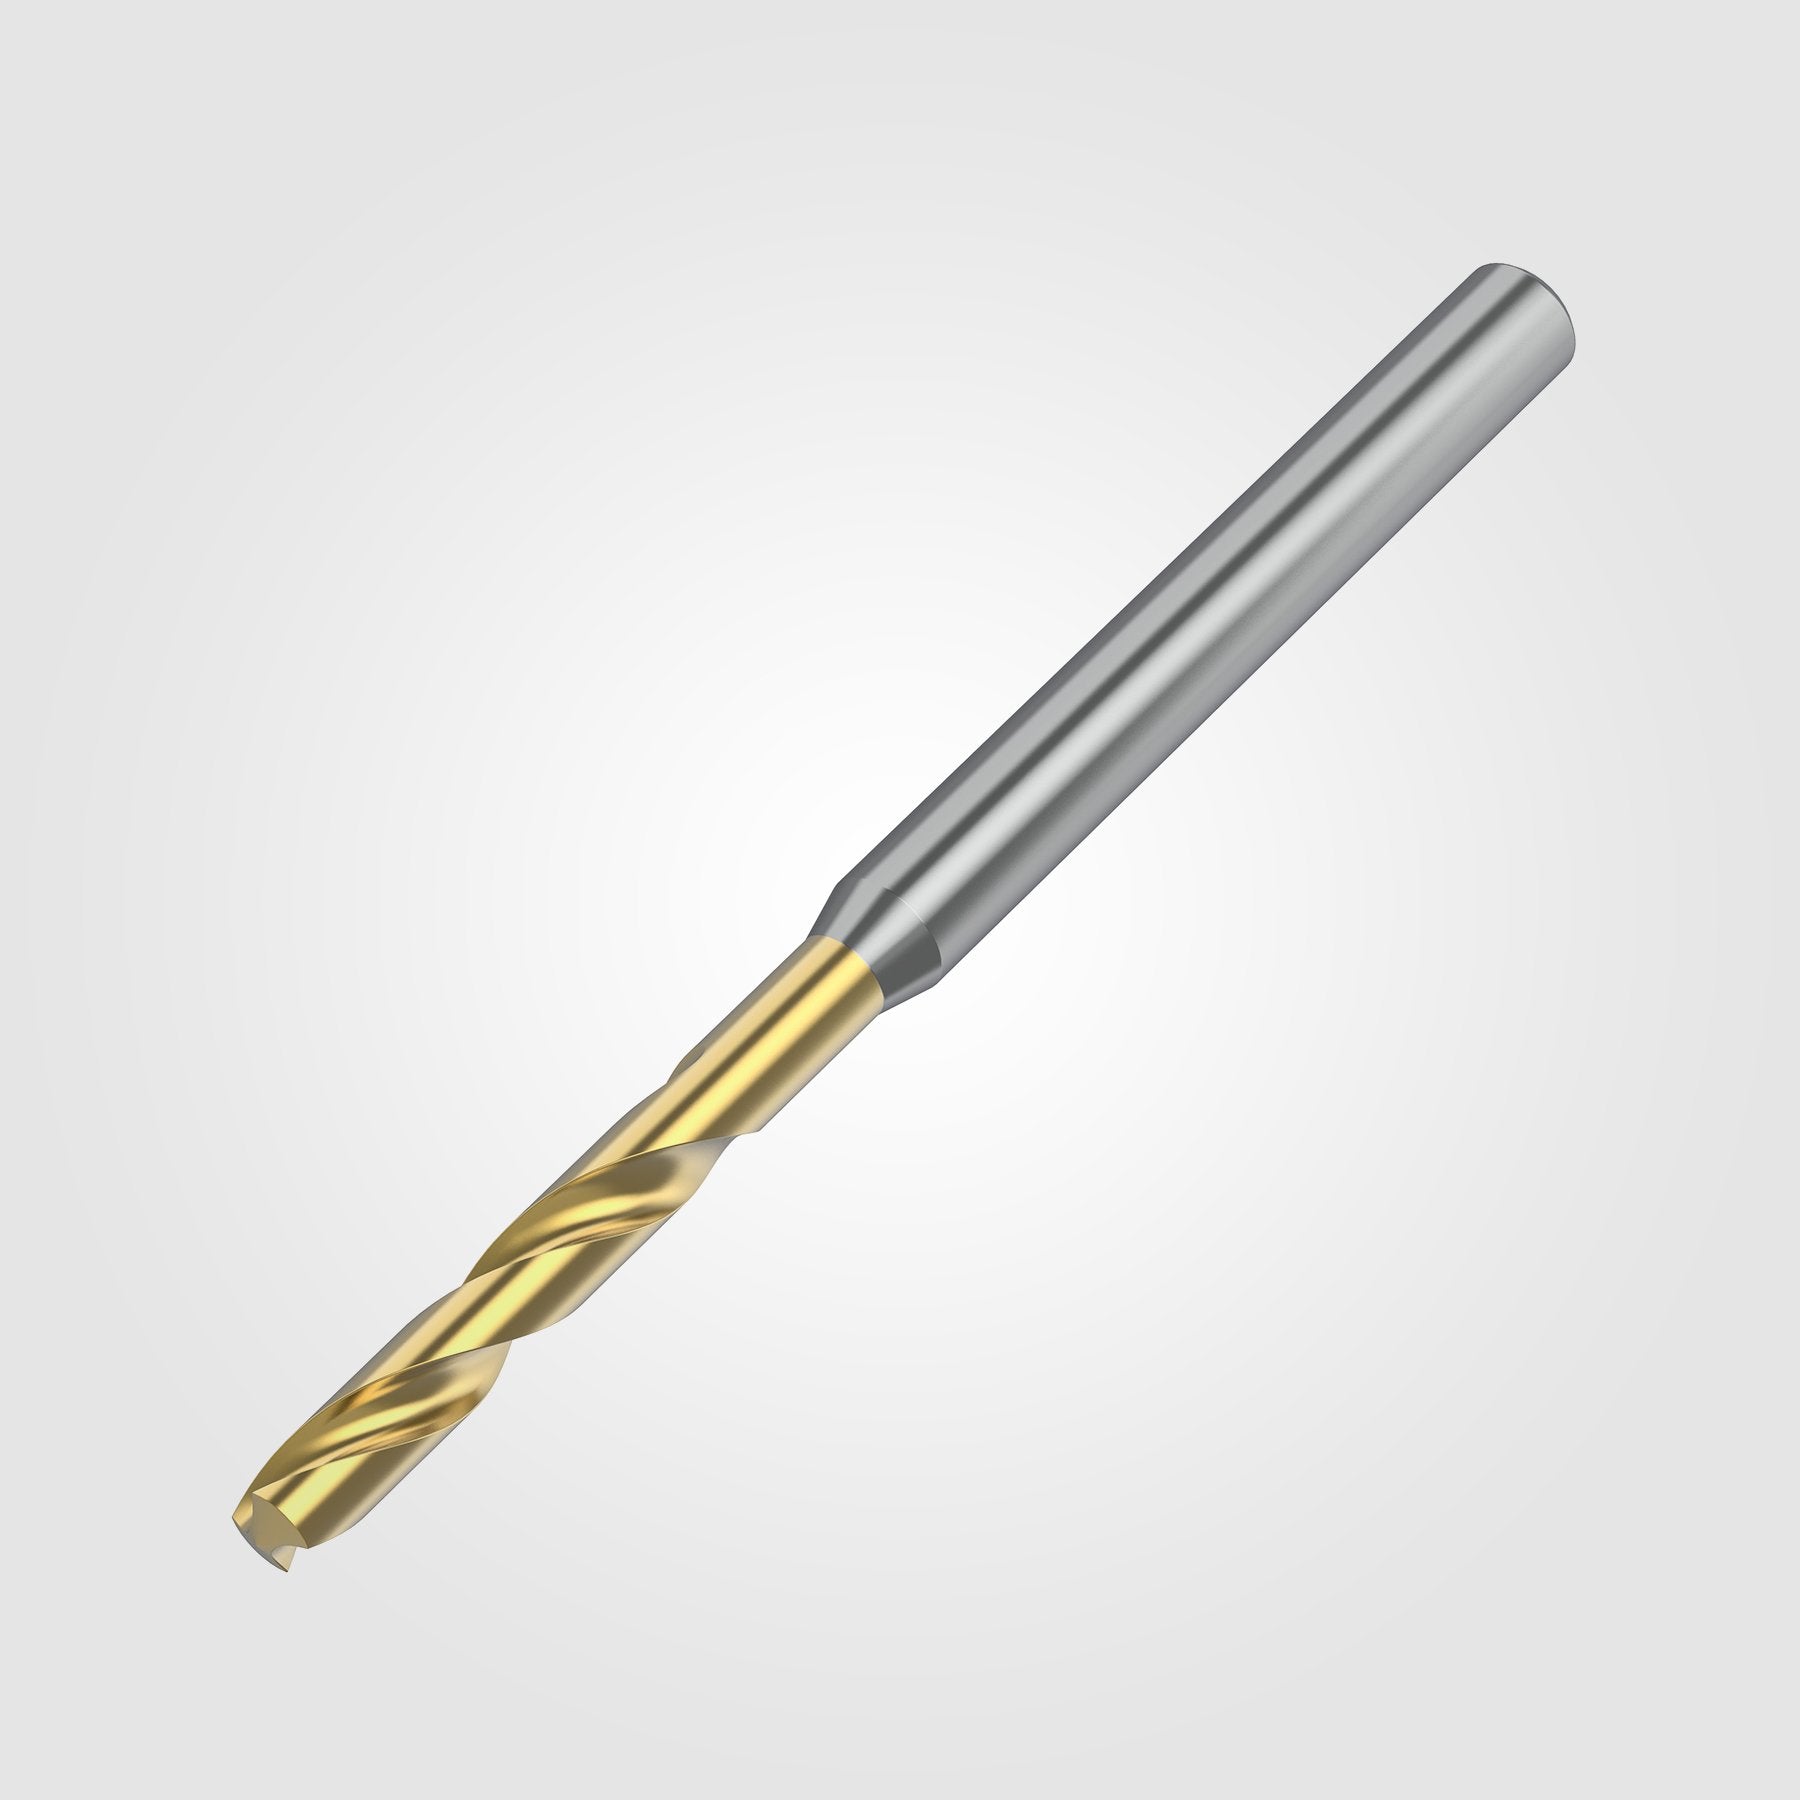 GOdrill (THROUGH COOLANT) | 2.2mm / .0866" / 3xD | SOLID CARBIDE DRILL | 4148811